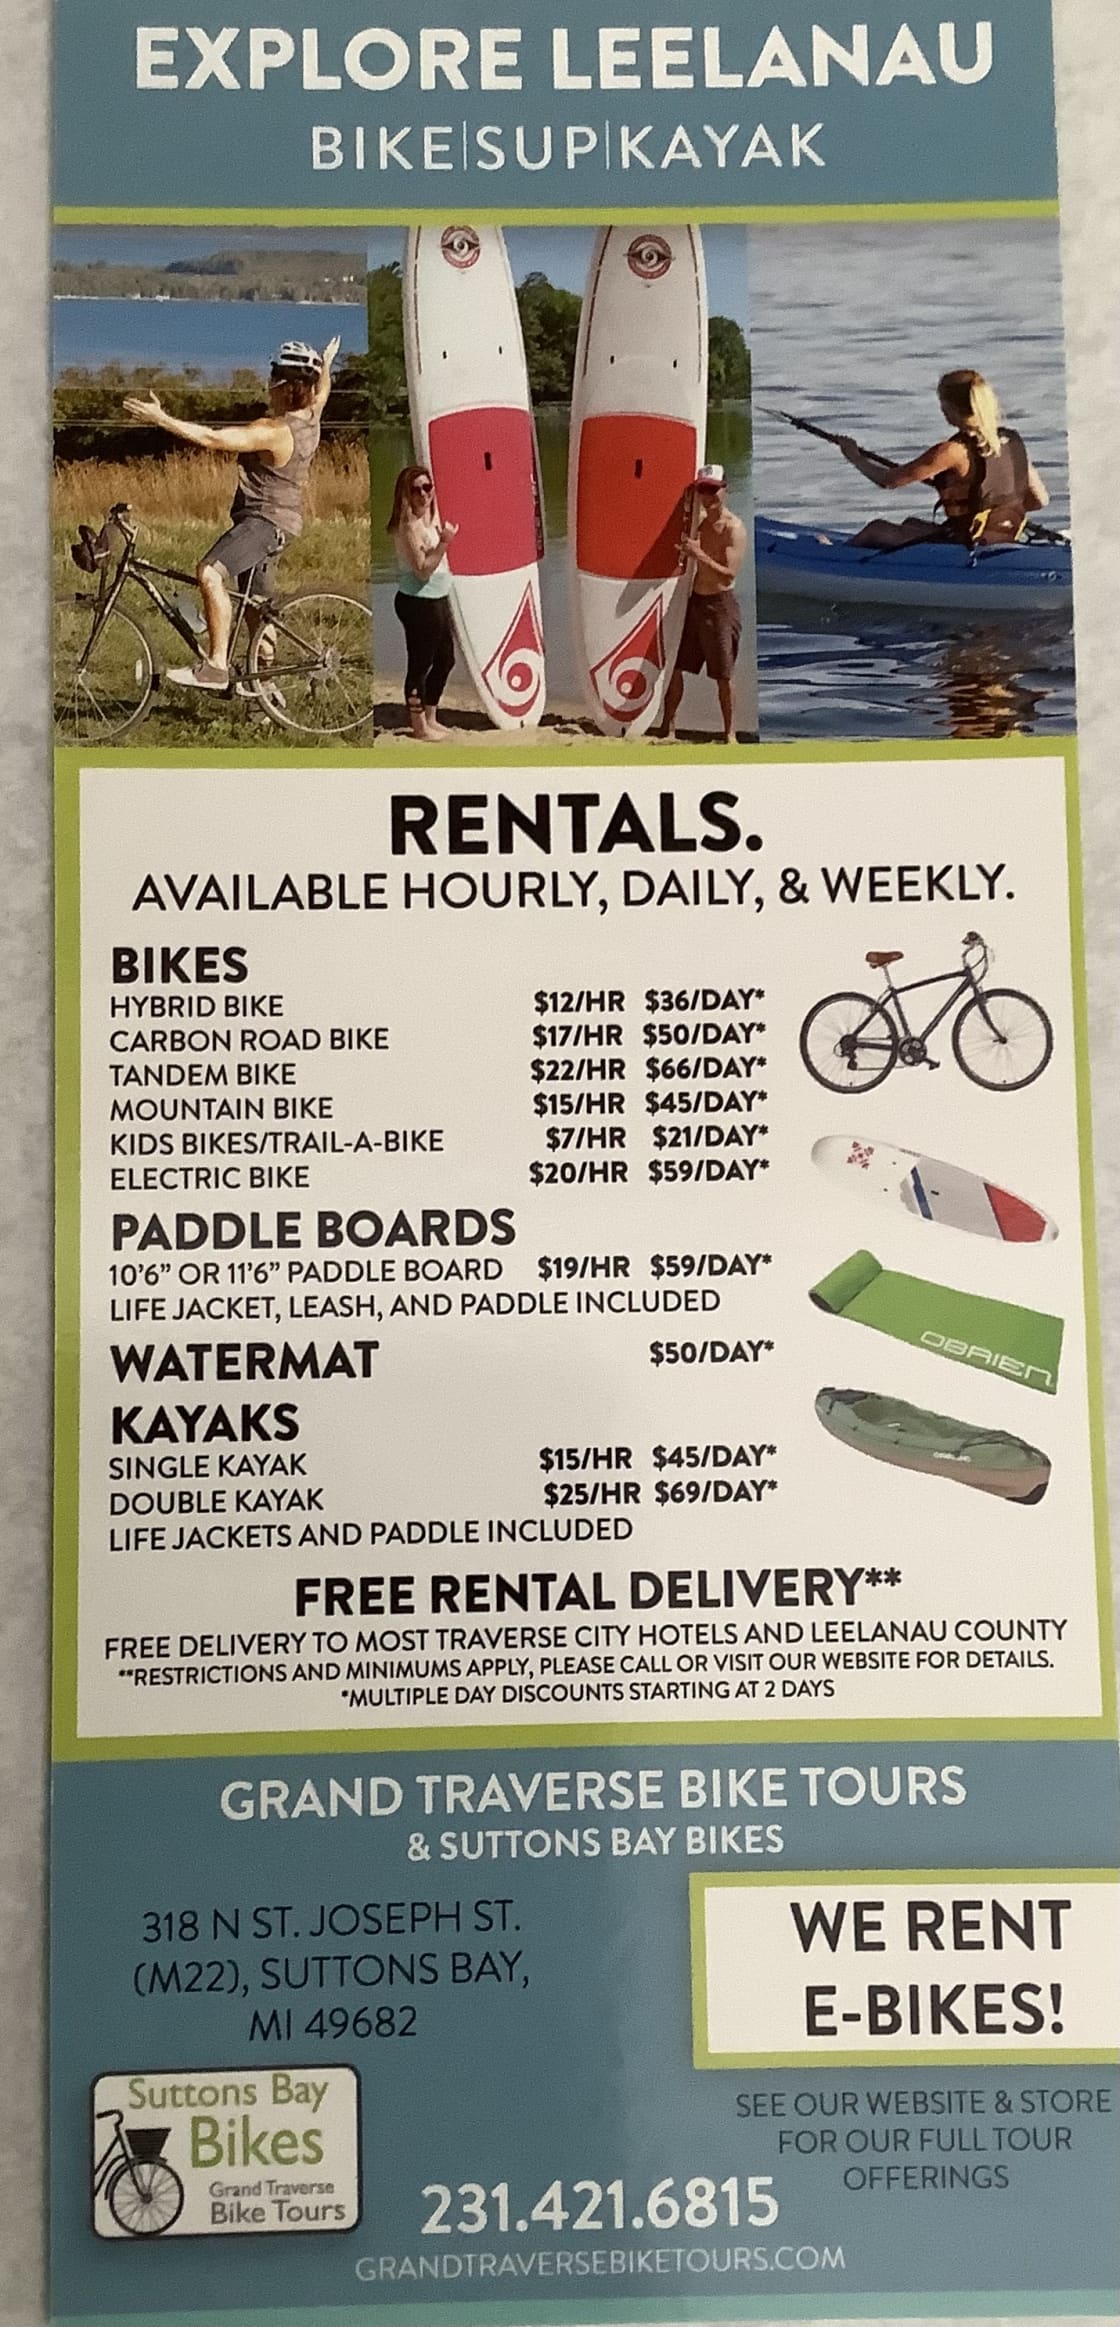 Suttons Bay Bikes has Bike,  kayak and SUP rentals.  5 miles from here. 
The bike trail is less than a mile in either direction of us.  